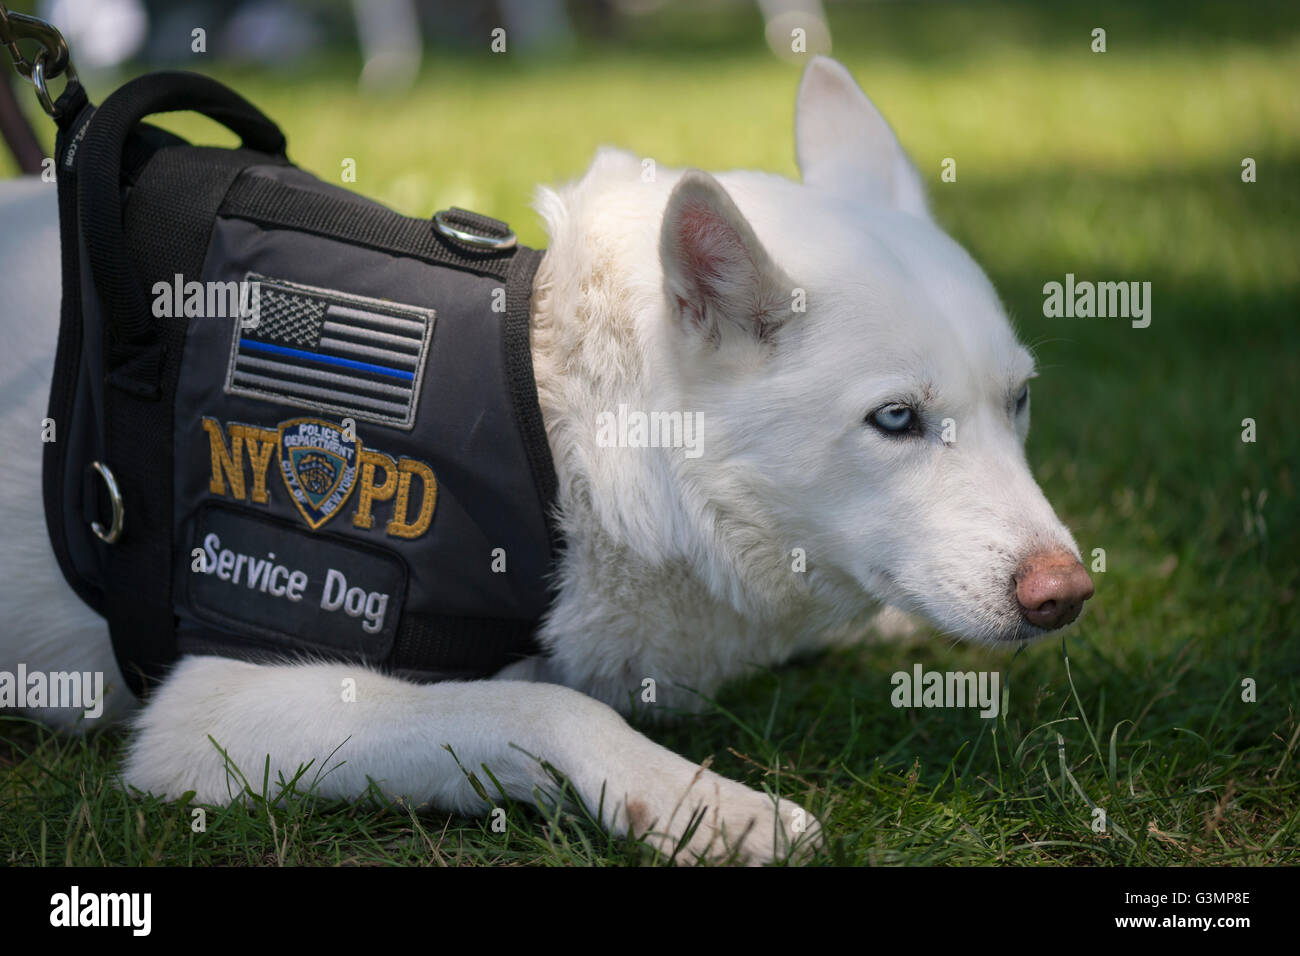 Westbury, New York, USA. June 12, 2016. MISKA, a Service Dog trained to  help American veterans, attends Antique and Collectible Auto Show at Old  Westbury Gardens, Long Island. Miska is part Husky